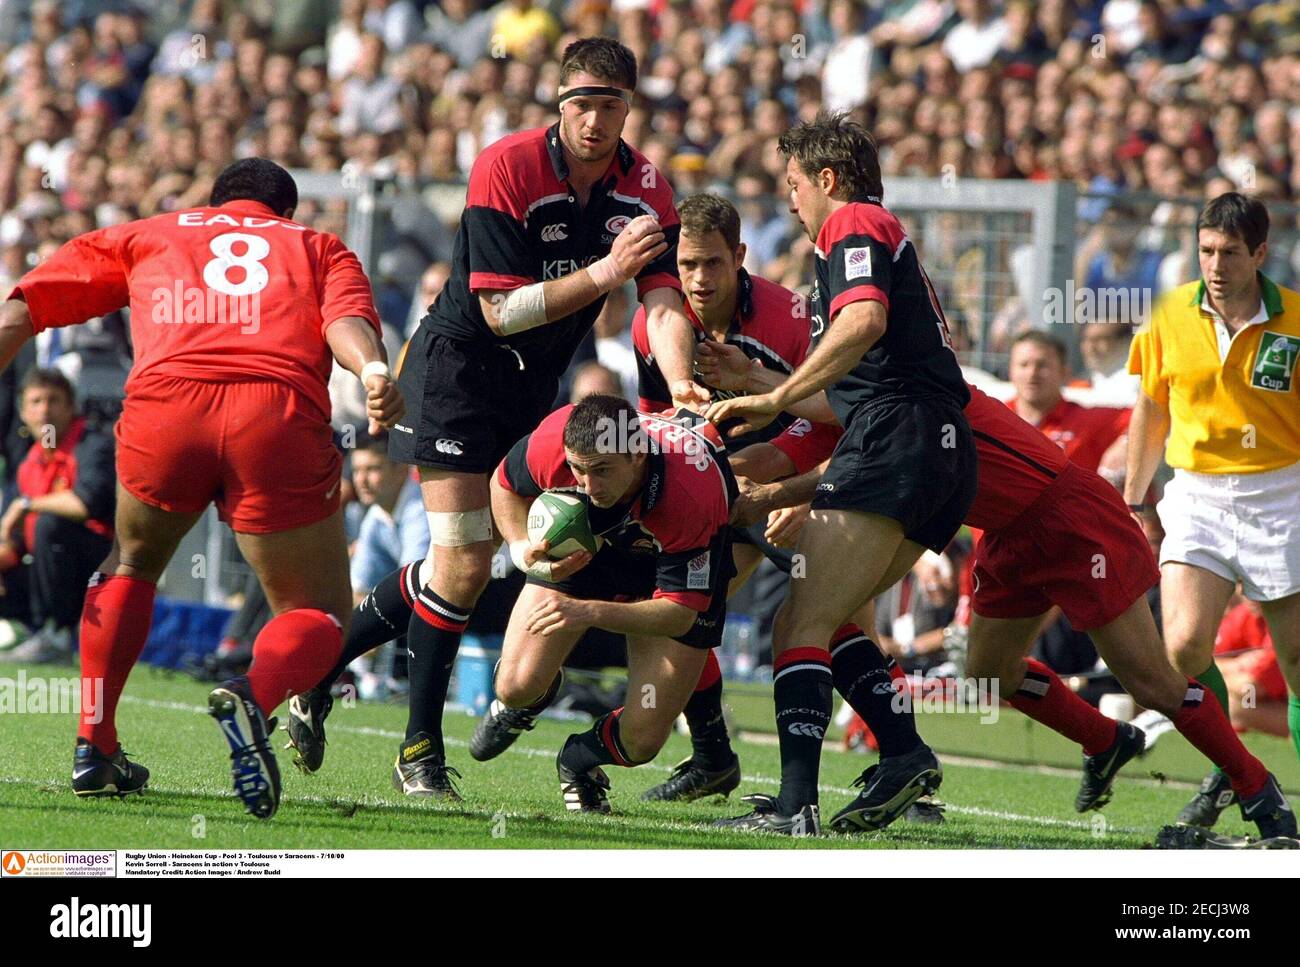 Rugby Union - Heineken Cup - Pool 3 - Toulouse v Saracens - 7/10/00 Kevin  Sorrell - Saracens in action v Toulouse Mandatory Credit: Action Images /  Andrew Budd Stock Photo - Alamy